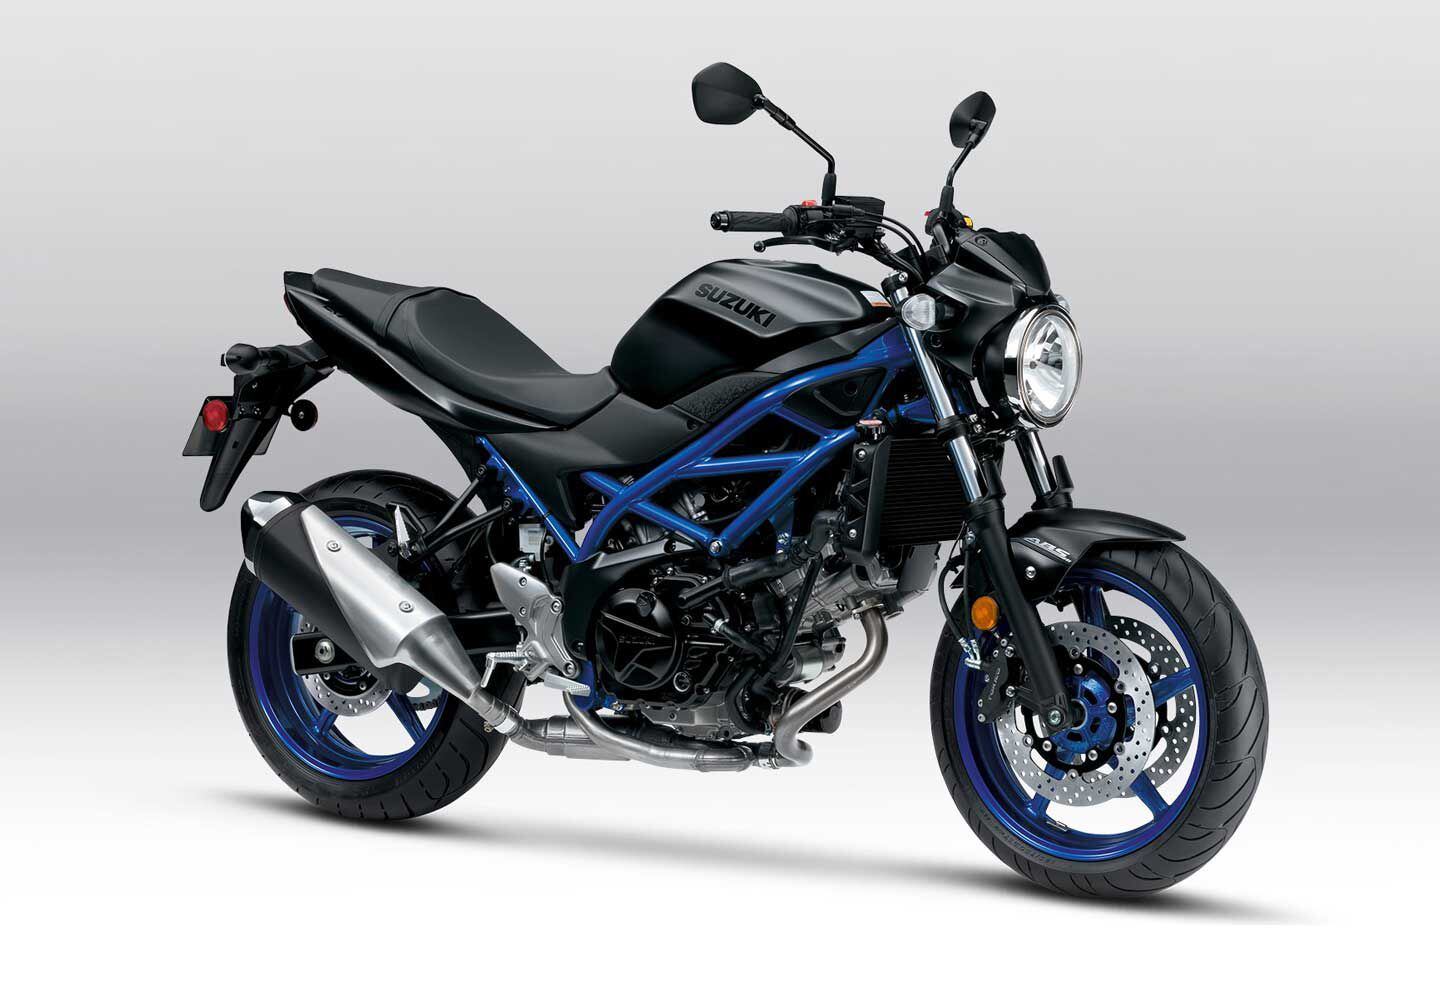 The only V-twin, and also the least expensive bike here, the Suzuki SV650 is still one of the best values in motorcycling. 2022 model shown.